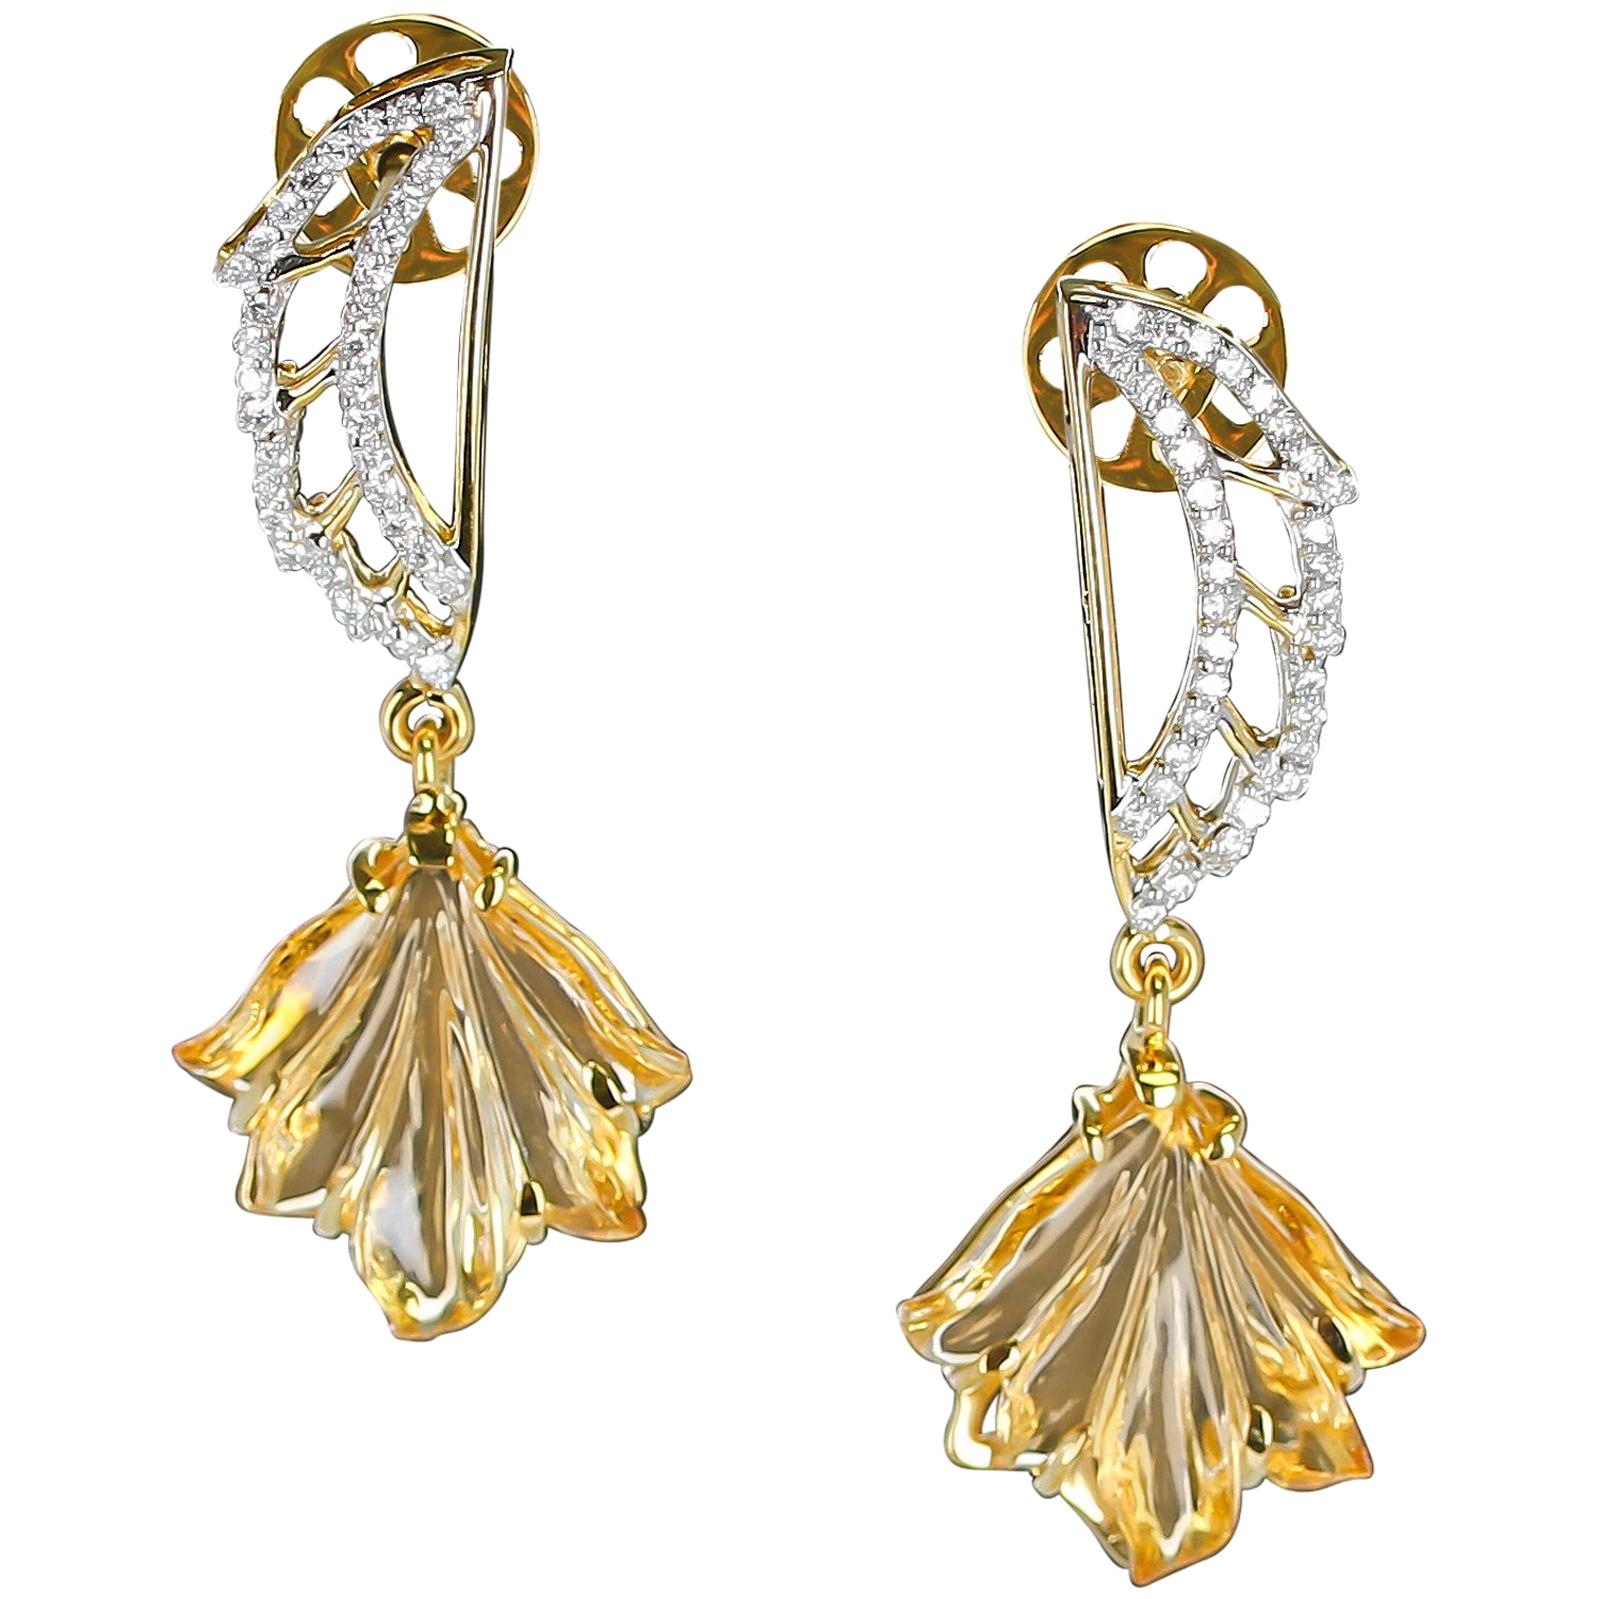 Carved Citrine and Diamond Wing Earrings, 14 Karat Gold